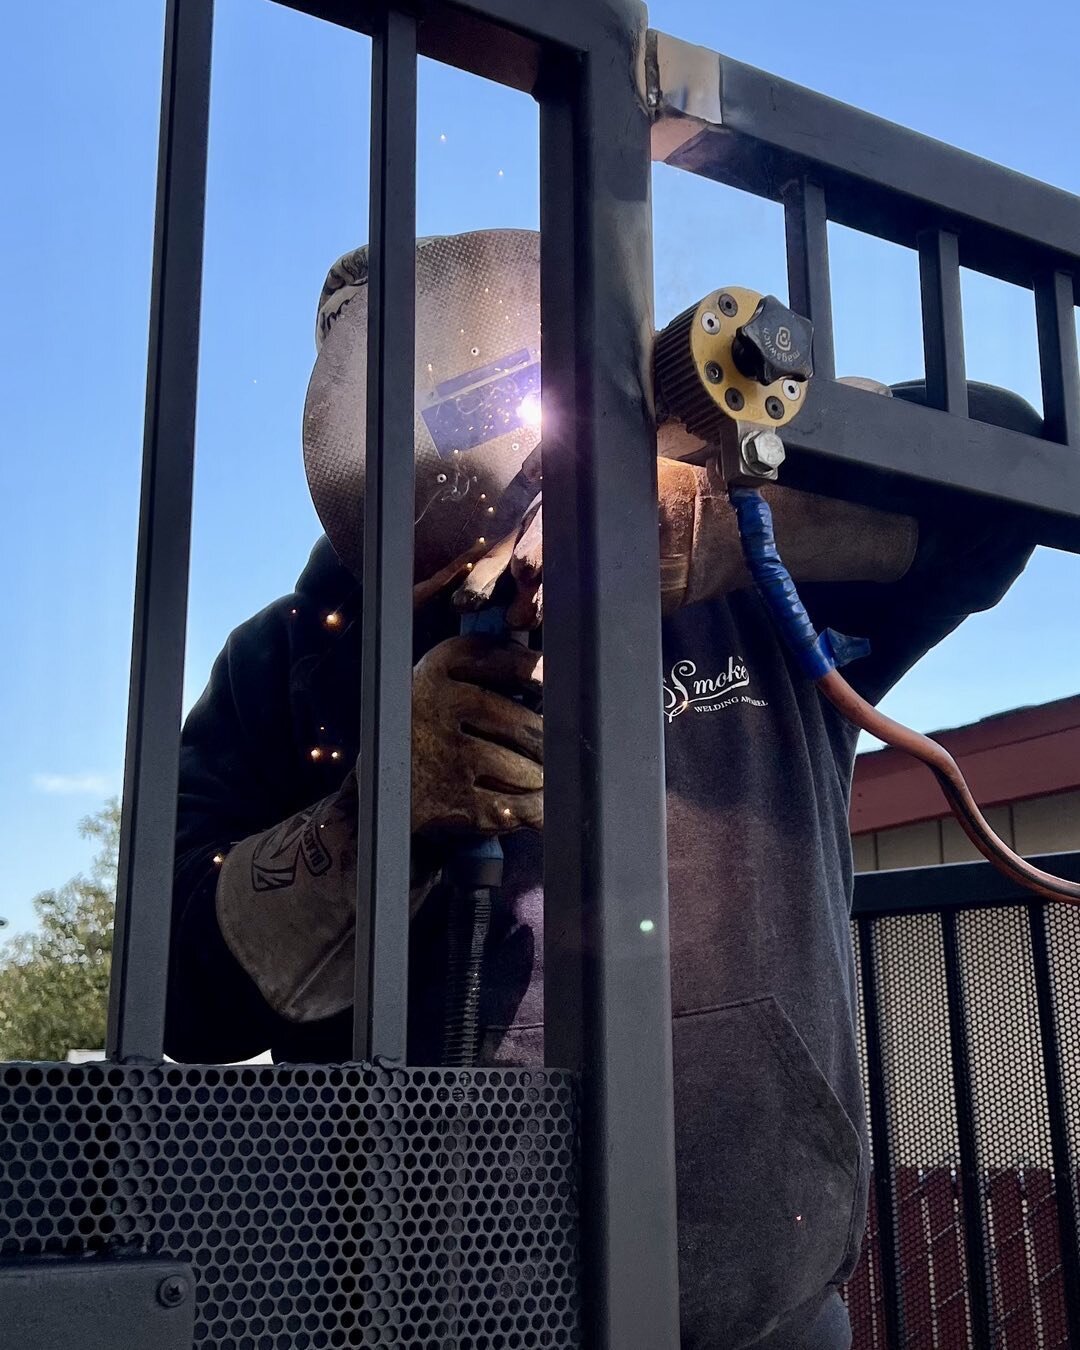 Welding up a gate after we adjusted it and leveled it. Protected by @upinsmokeweldingapparel 
@cmrfabrication hood
.
.
.
#welder #welding #fabricator #weldred #lincolnelectric #vantage322